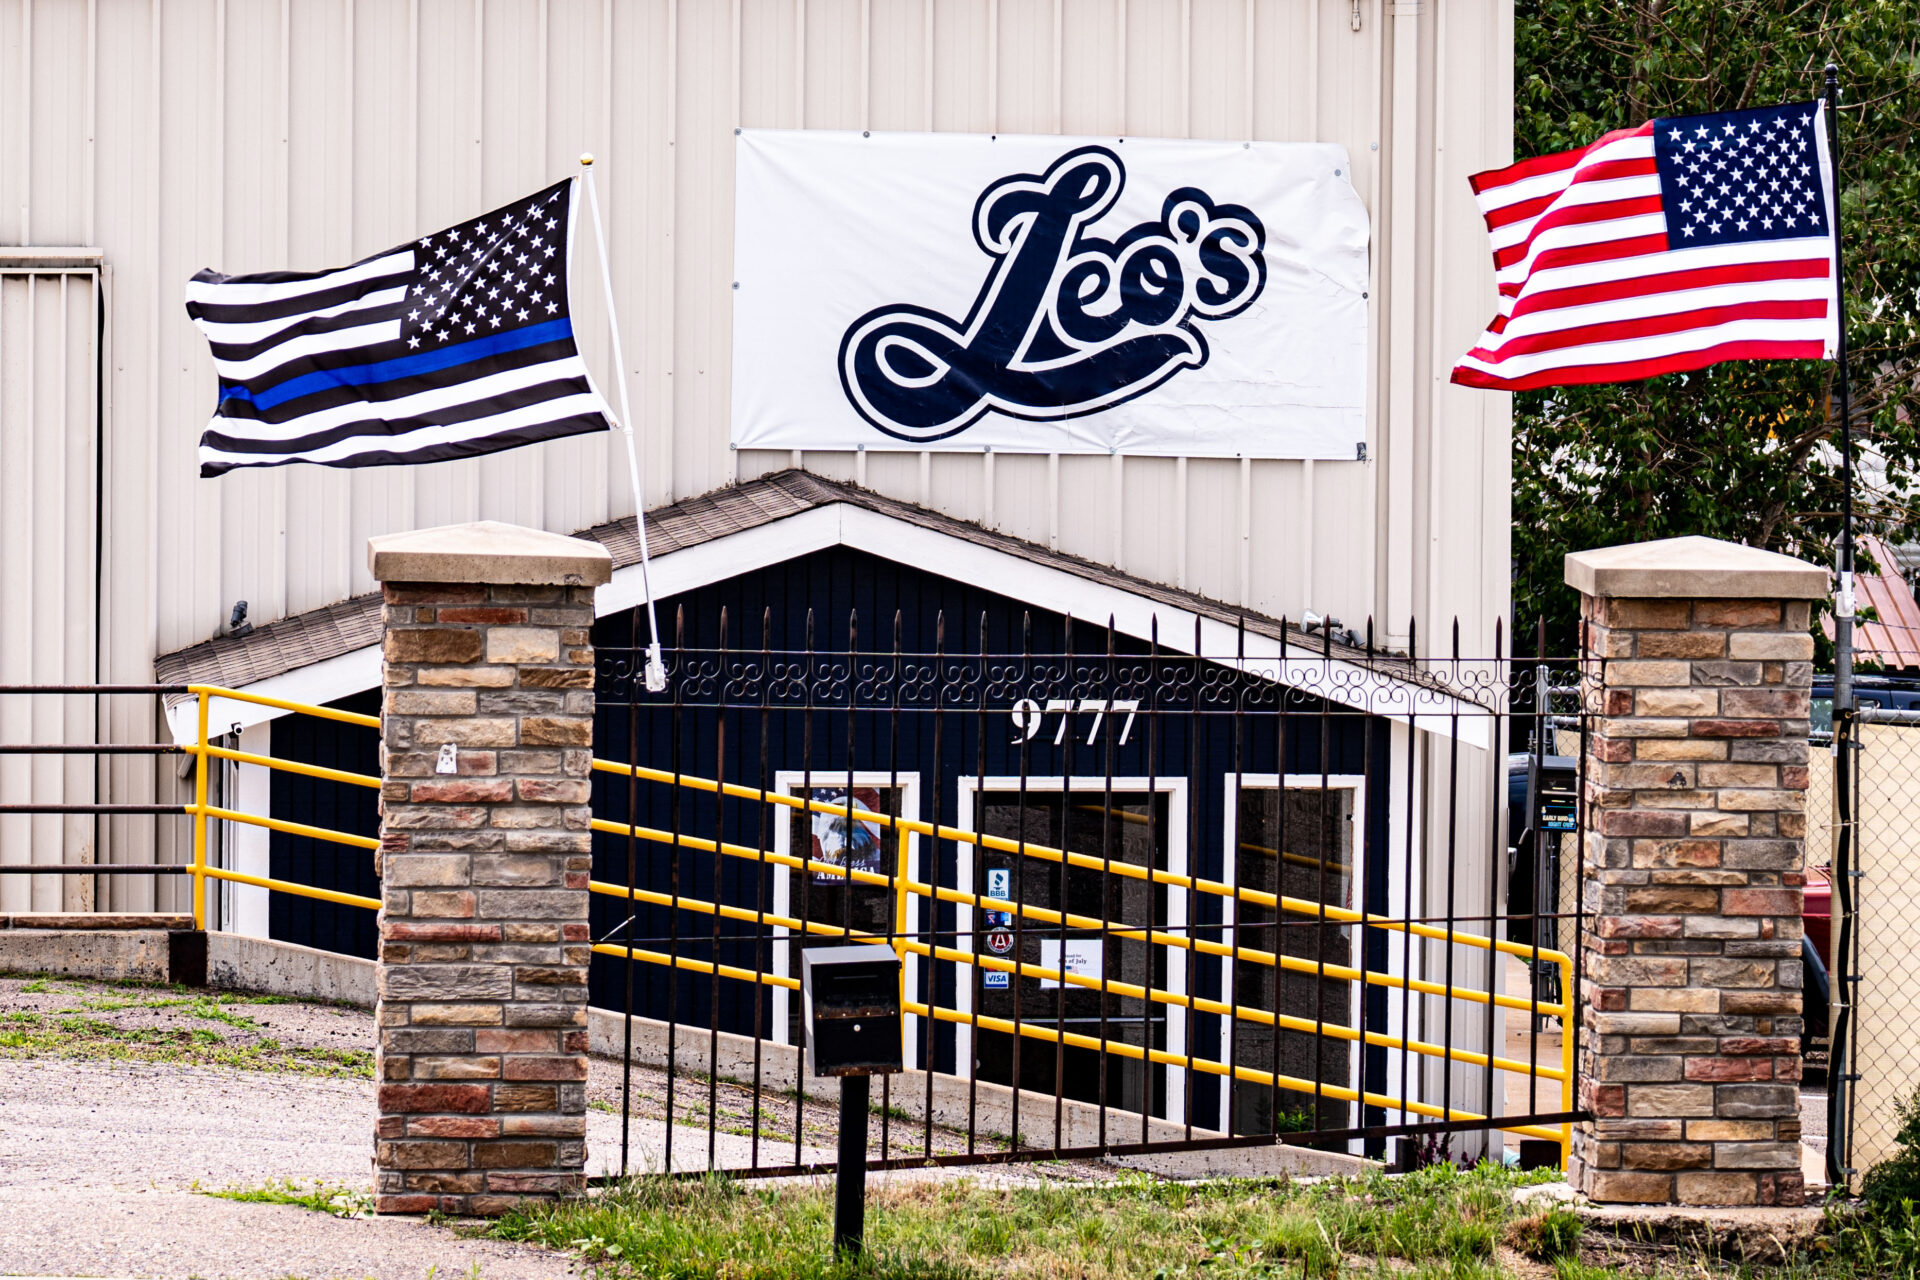 exterior view of the front side of Leo's Auto Body auto shop building in Littleton